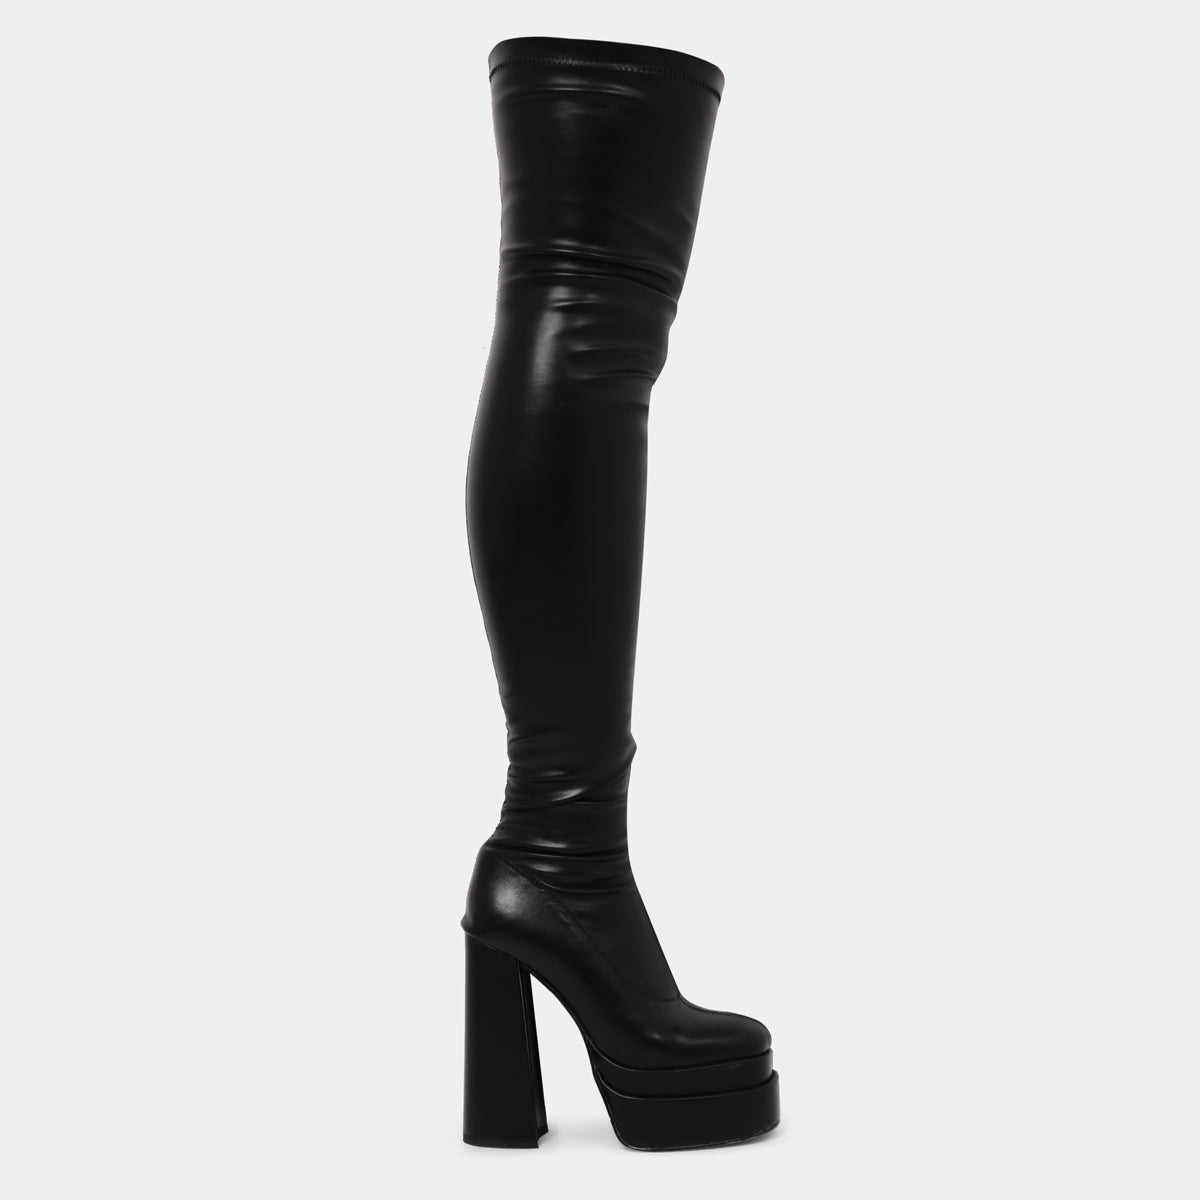 The Redemption Black Stretch Thigh High Boots - Long Boots - KOI Footwear - Black - Side View